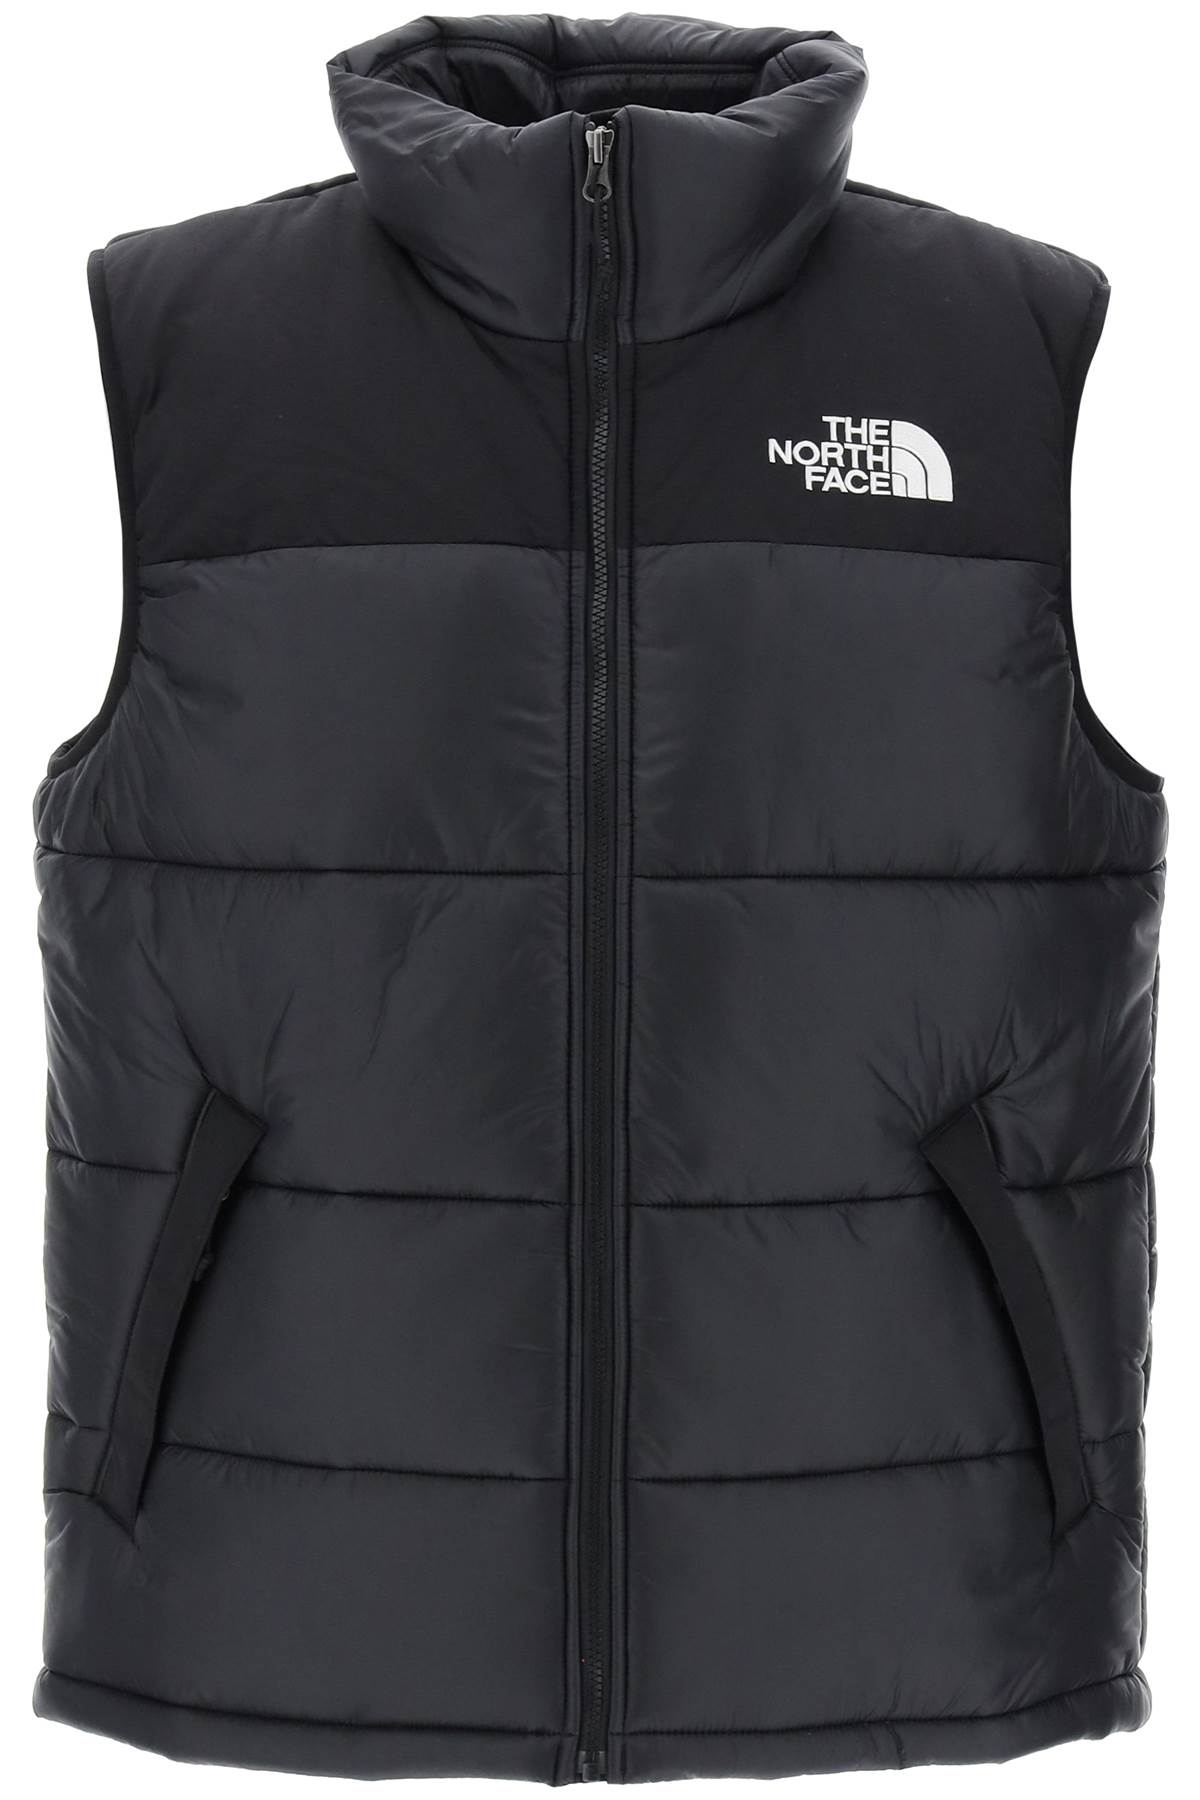 The north face himalayan padded vest-0